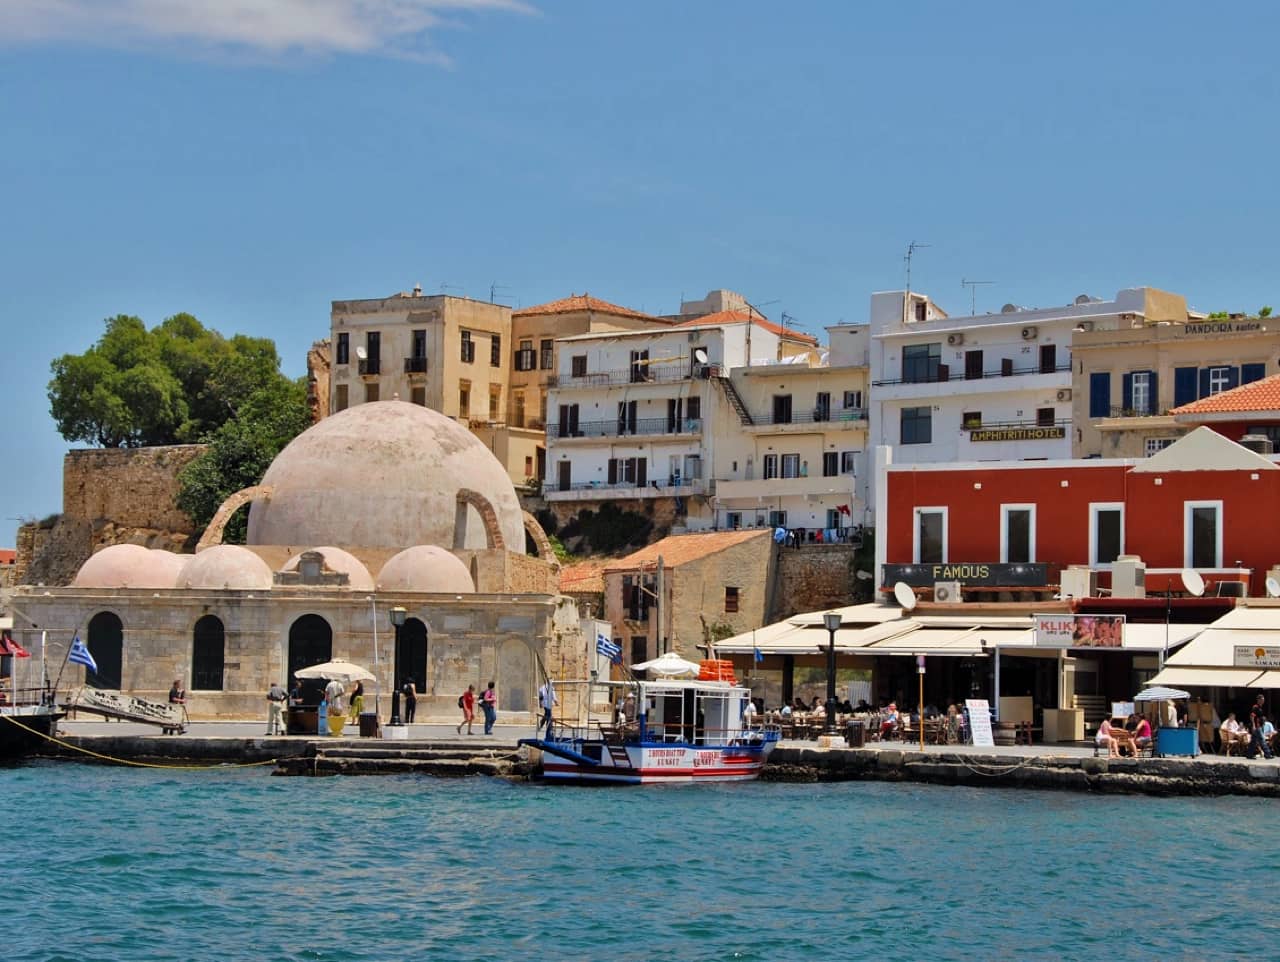 Austrian Carrier FlyNiki To Fly To 17 Greek Destinations in 2016, Including Heraklion and Chania